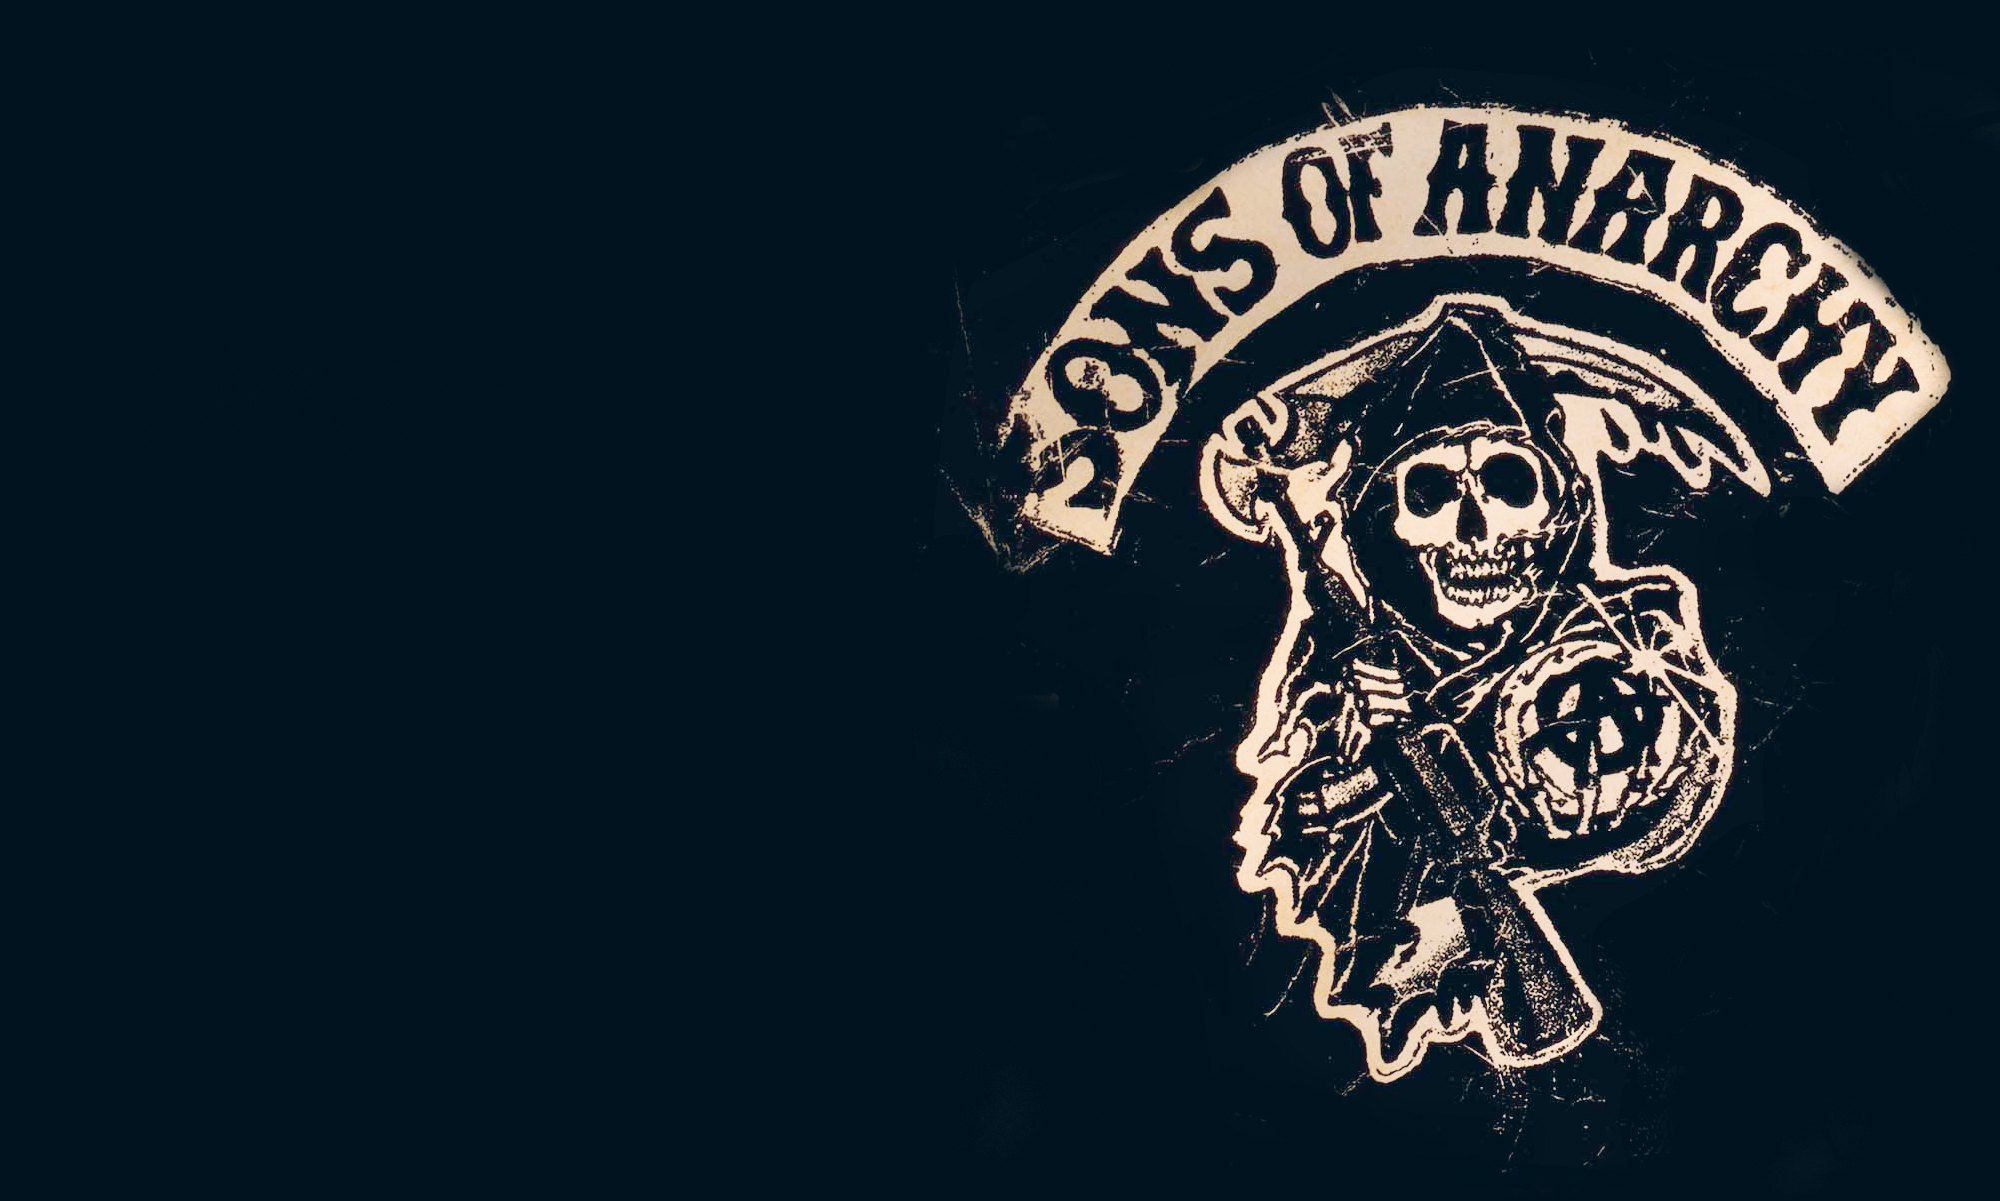 sons of anarchy, tv show wallpapers for tablet